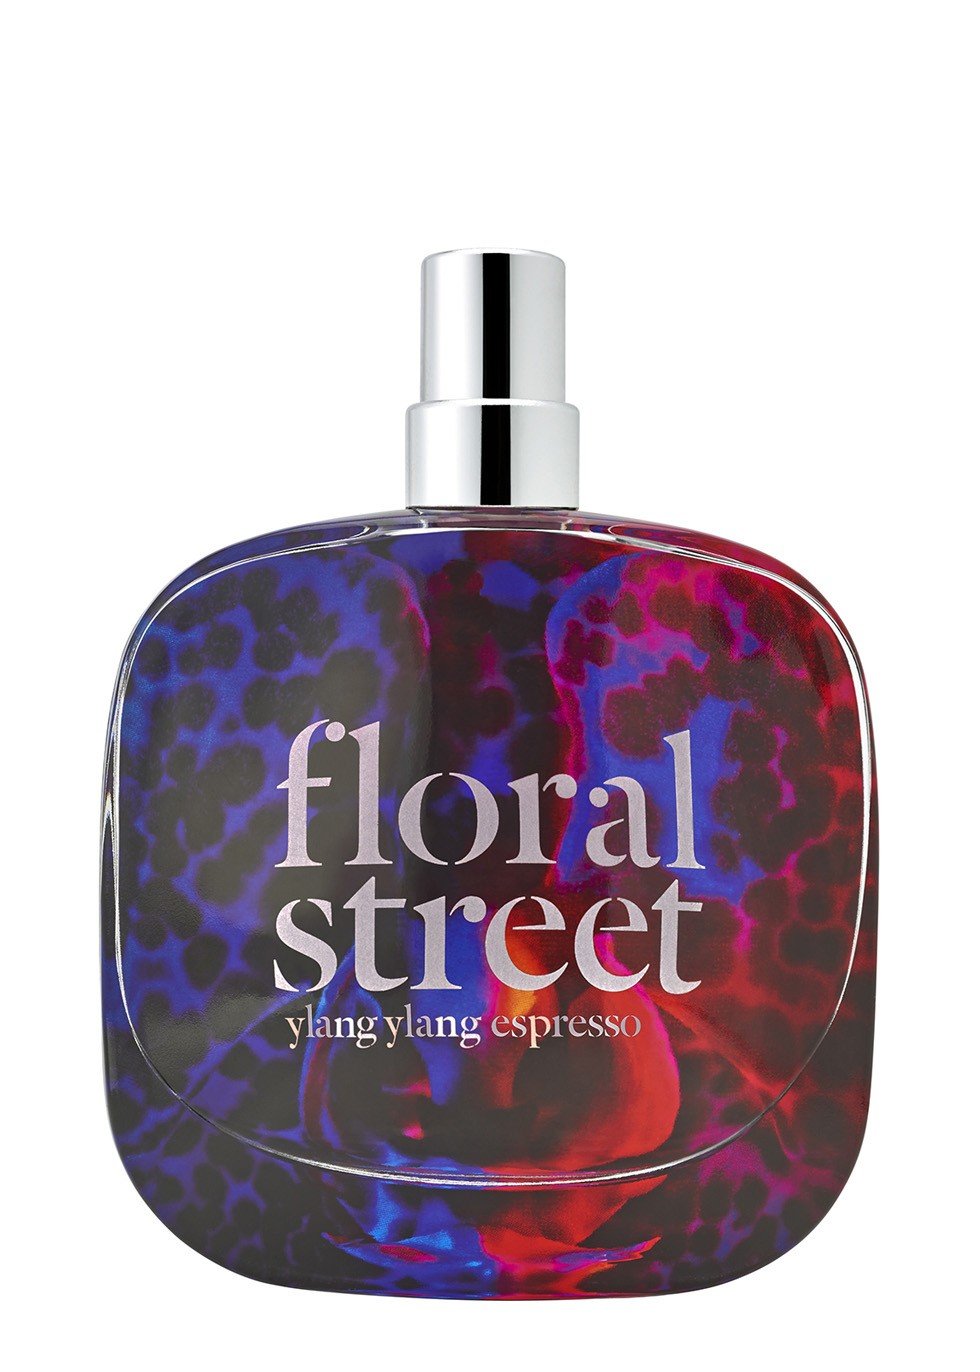 Ylang-Ylang Espresso Floral Street perfume - a new fragrance for women ...